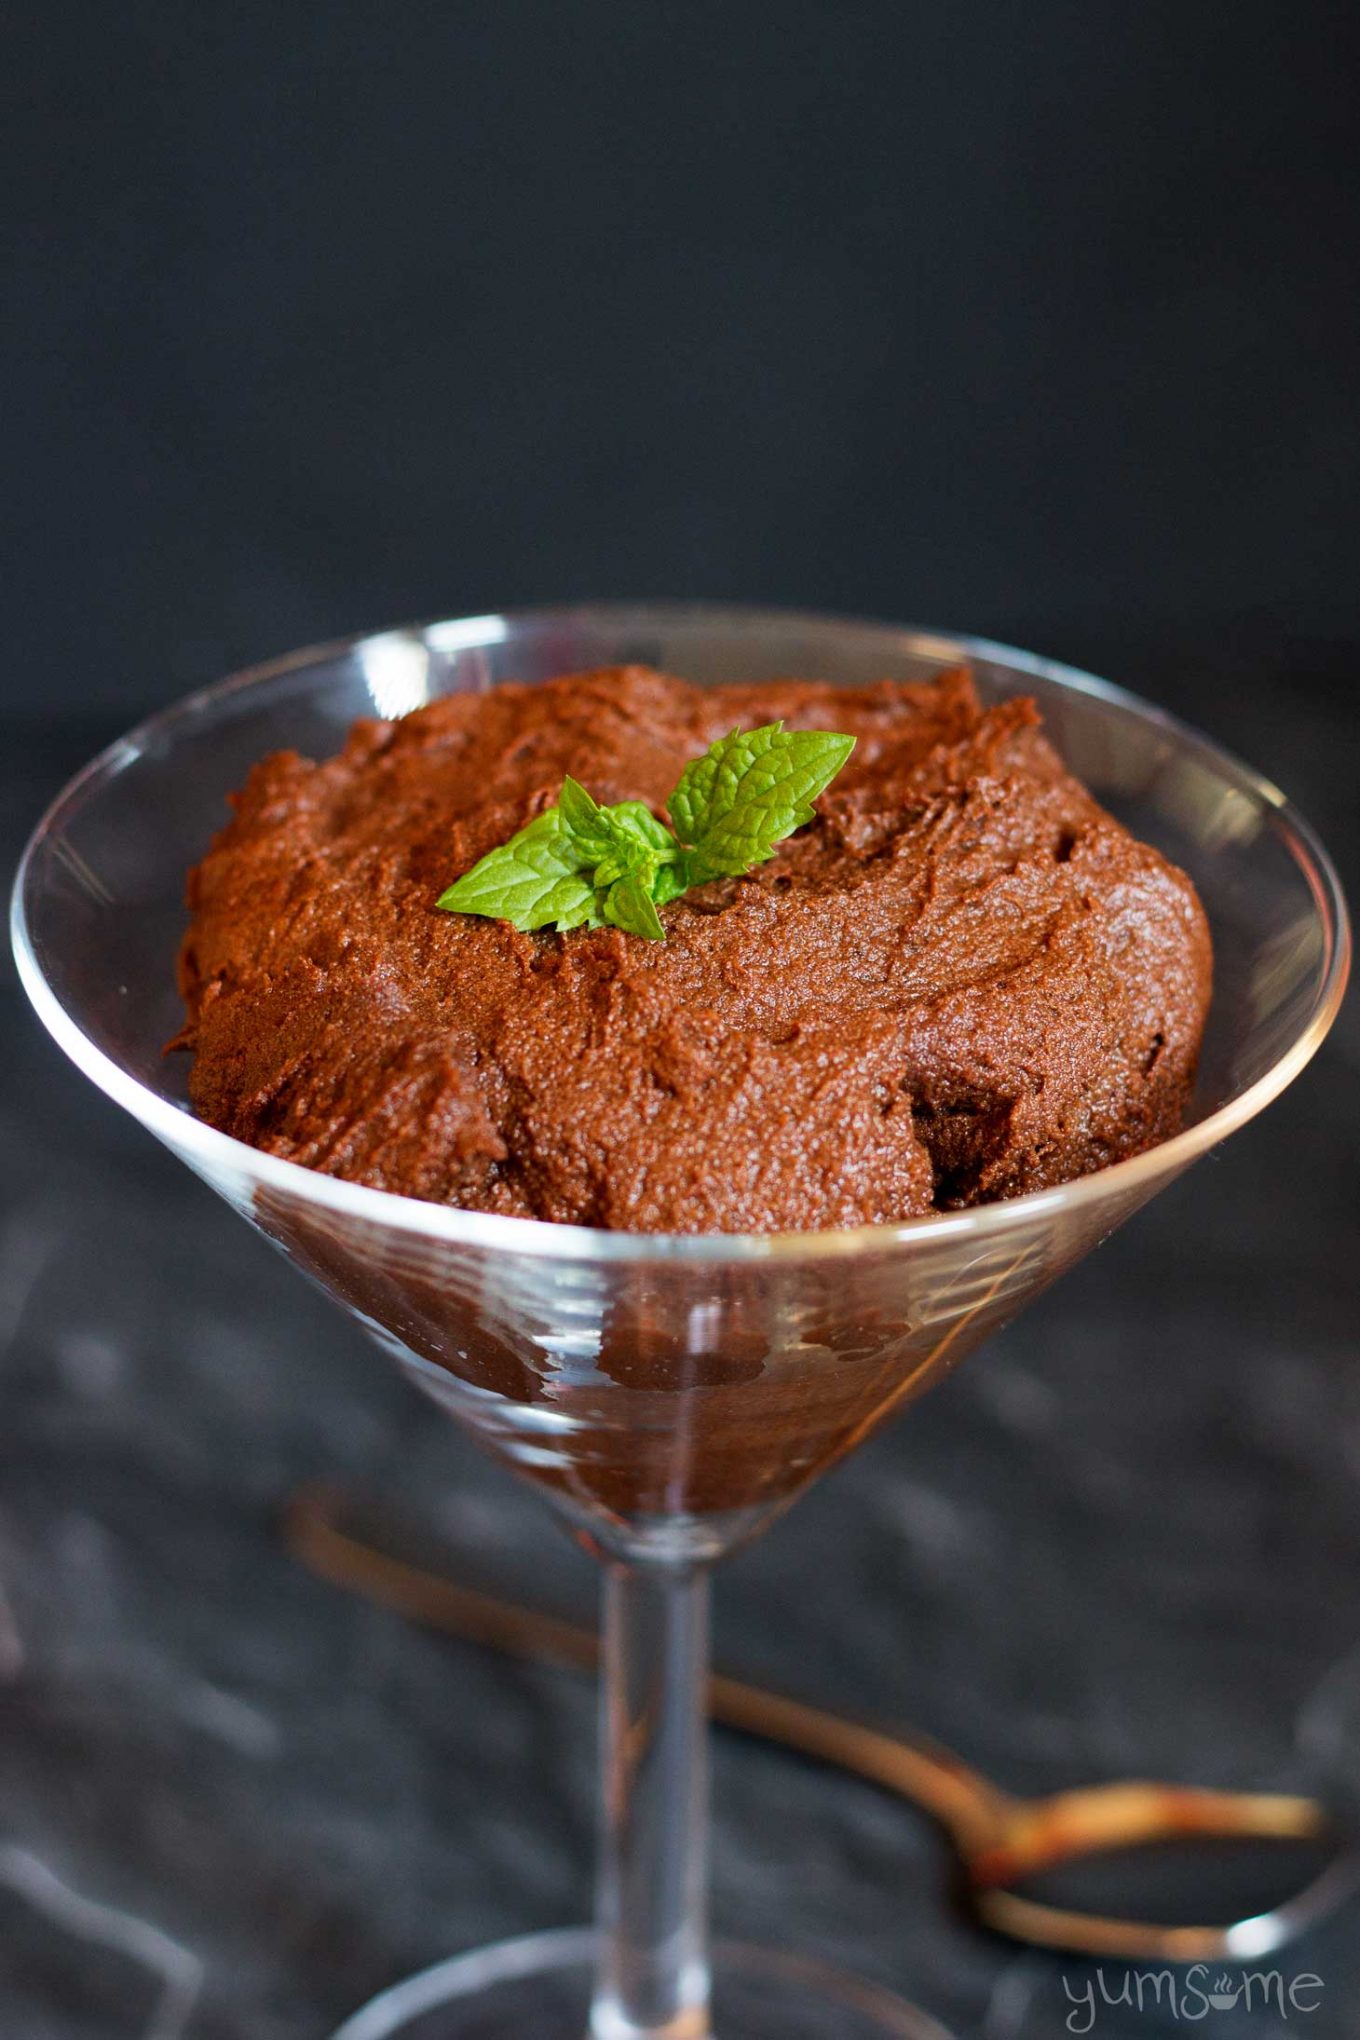 Vegan chocolate and sweet potato pudding, garnished with fresh mint, in a martini glass.